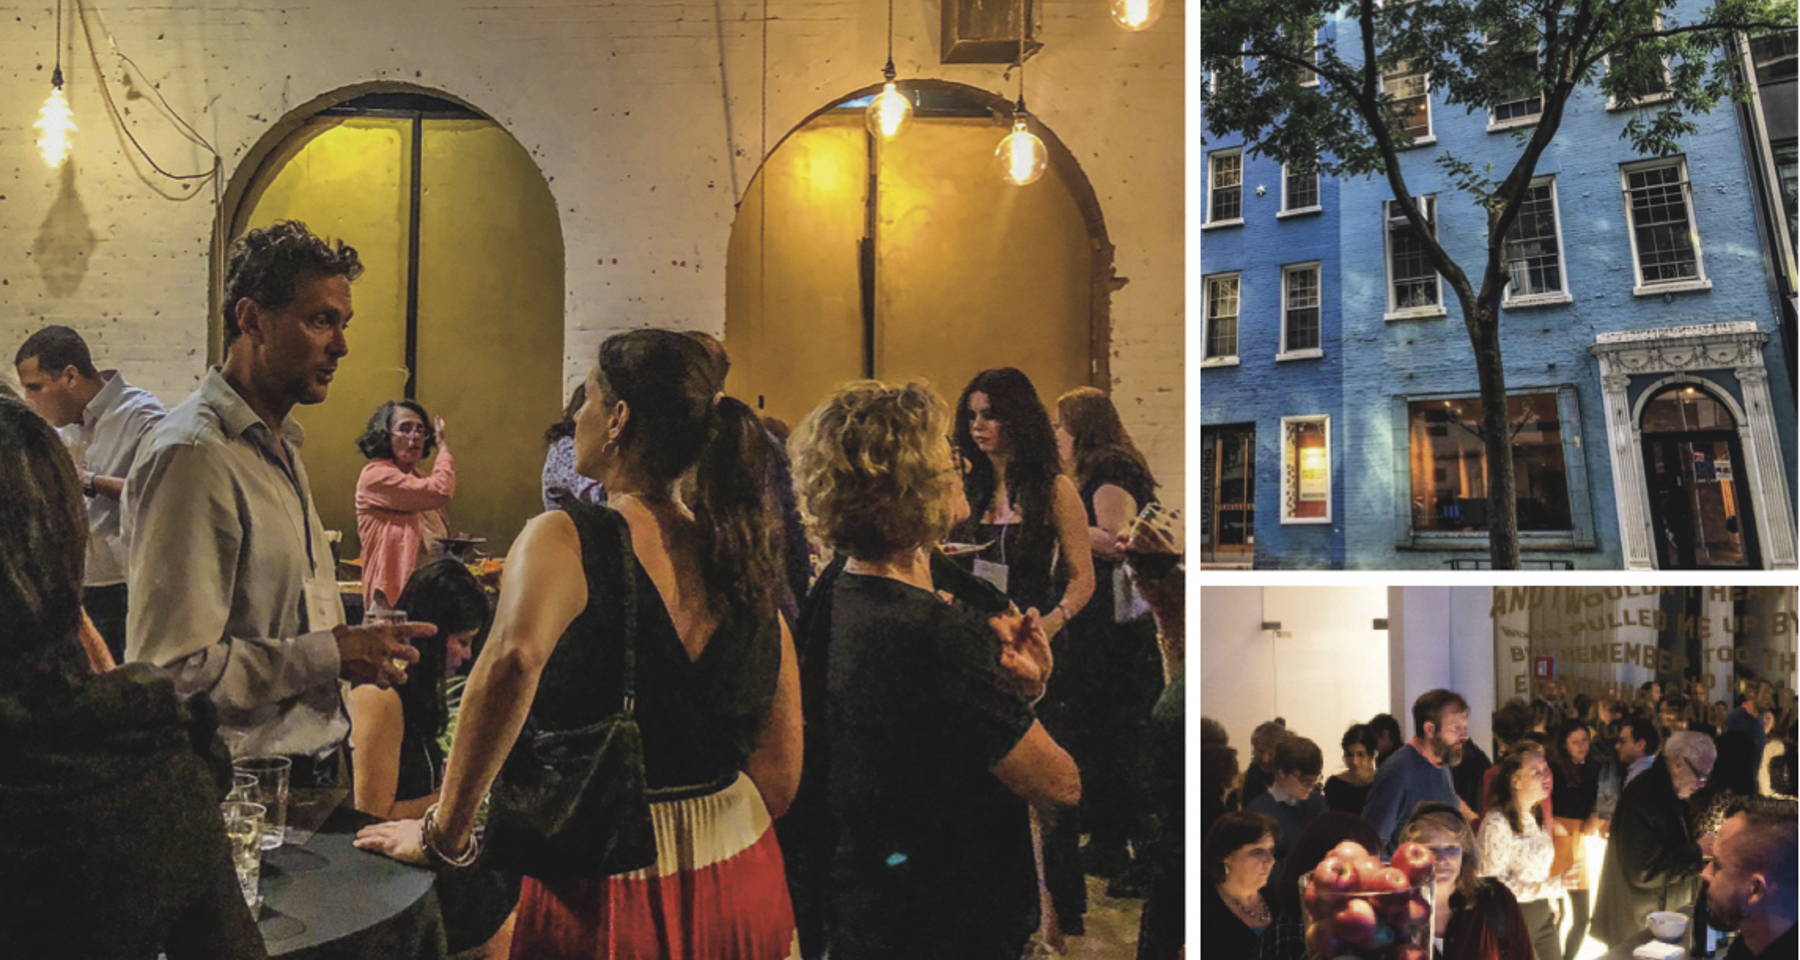 A Night Out at The Blue Gallery: Music, Fairy Tales, & Wine